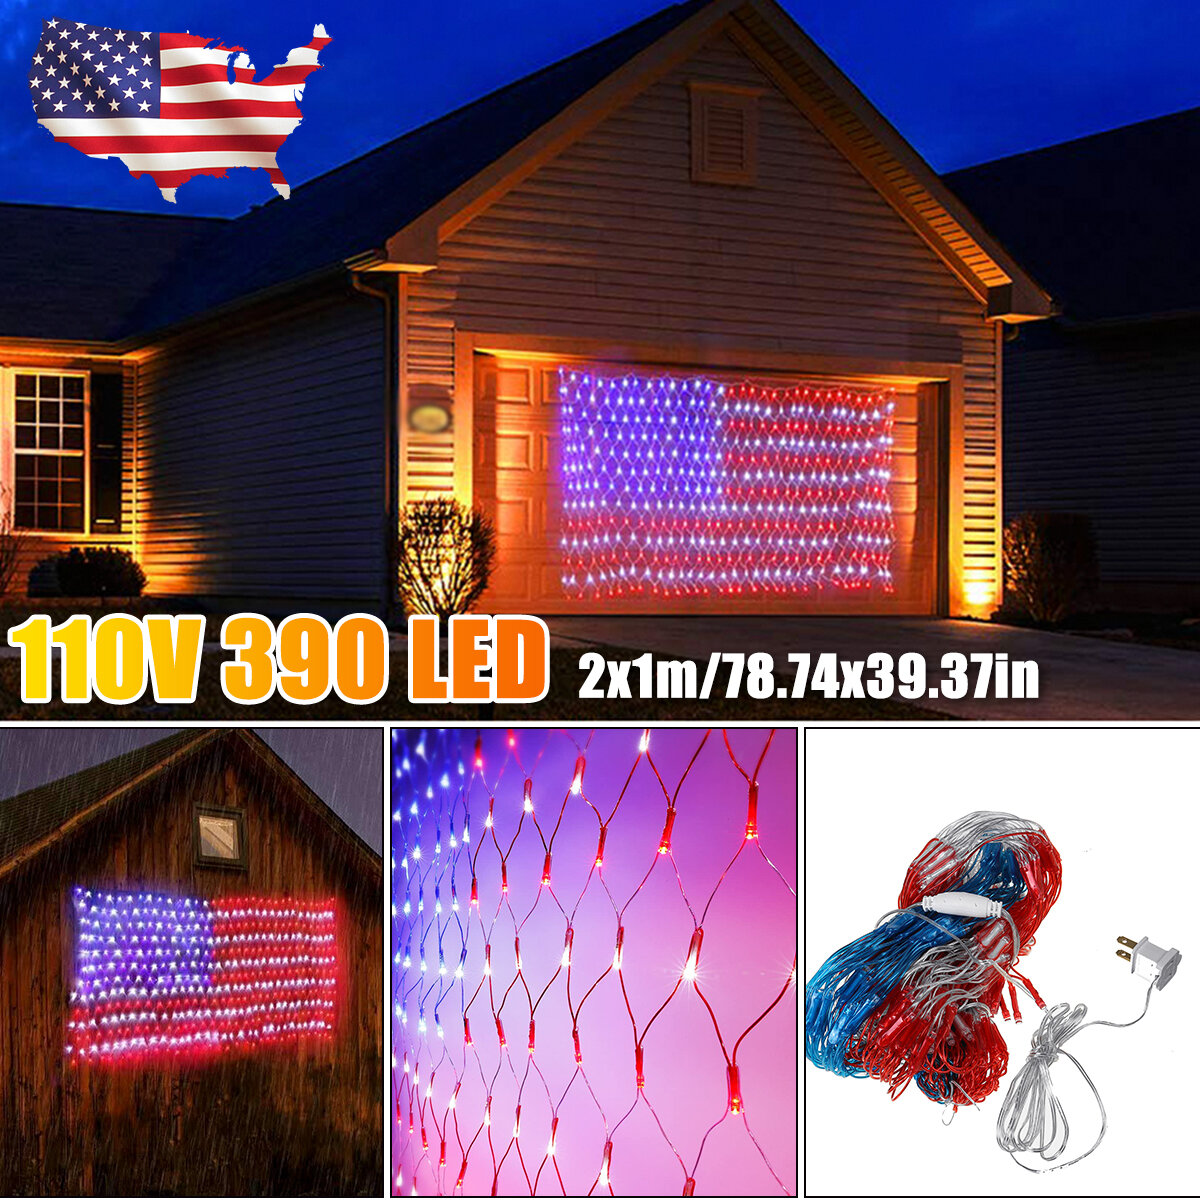 

AC110V 2m*1m American Flag Net Lamp Waterproof 390LED String Light Outdoor Yard Home Holiday Decoration